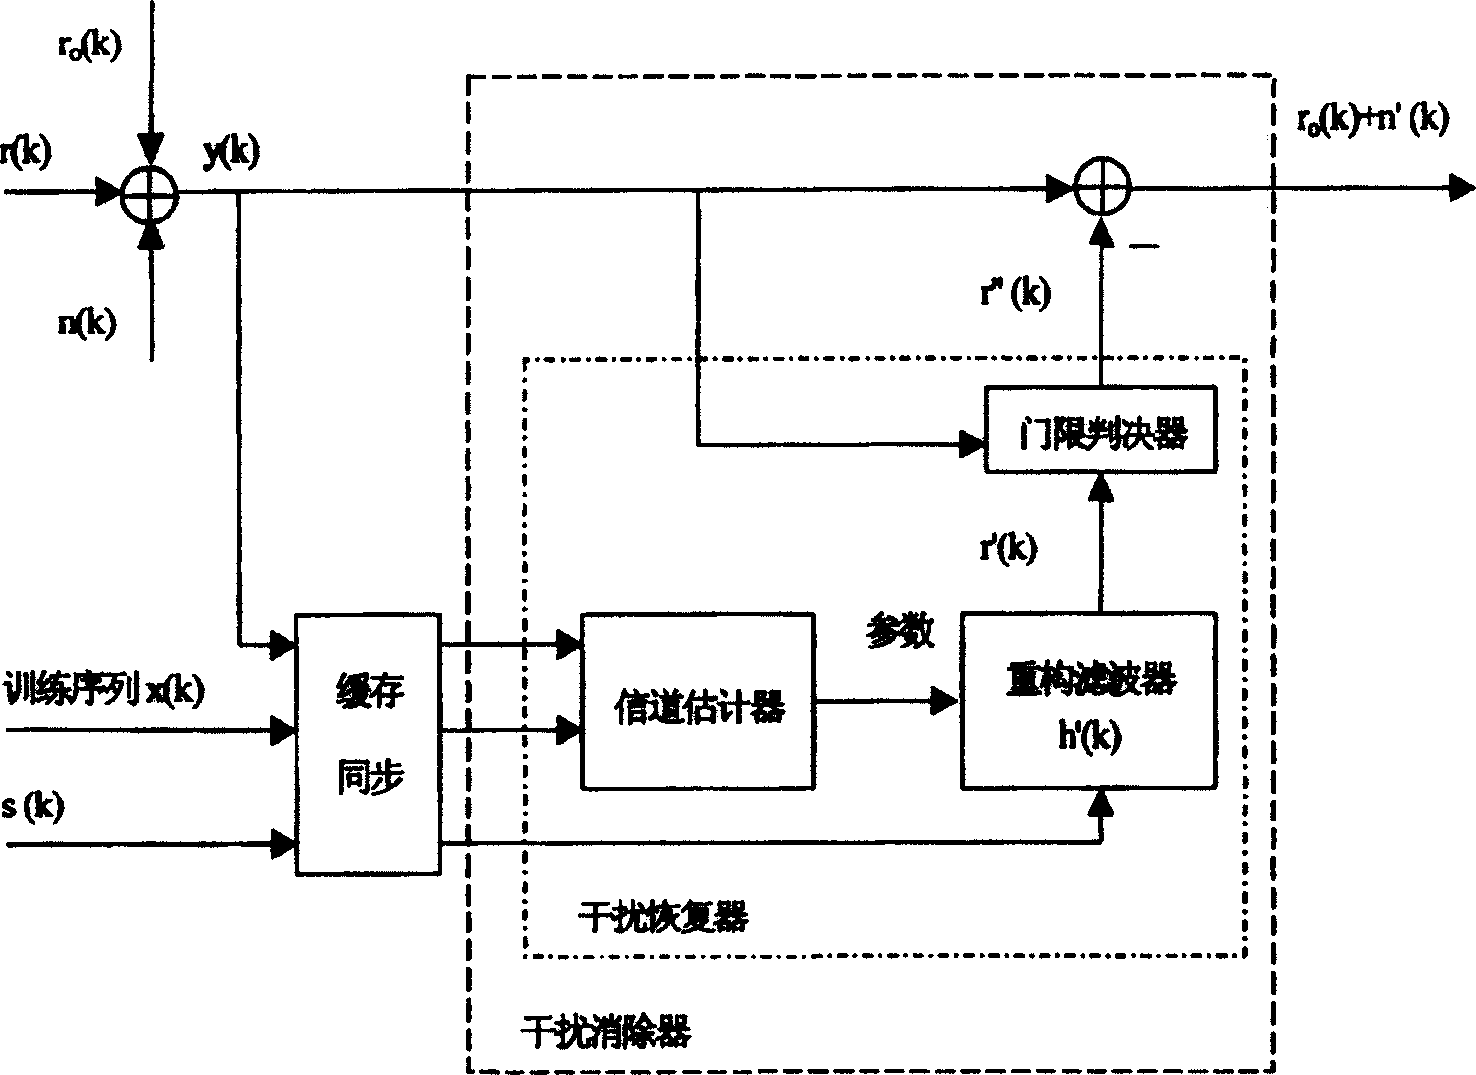 Interference eliminating method between basic stations of mobile communication system and correspondent mobile communication system